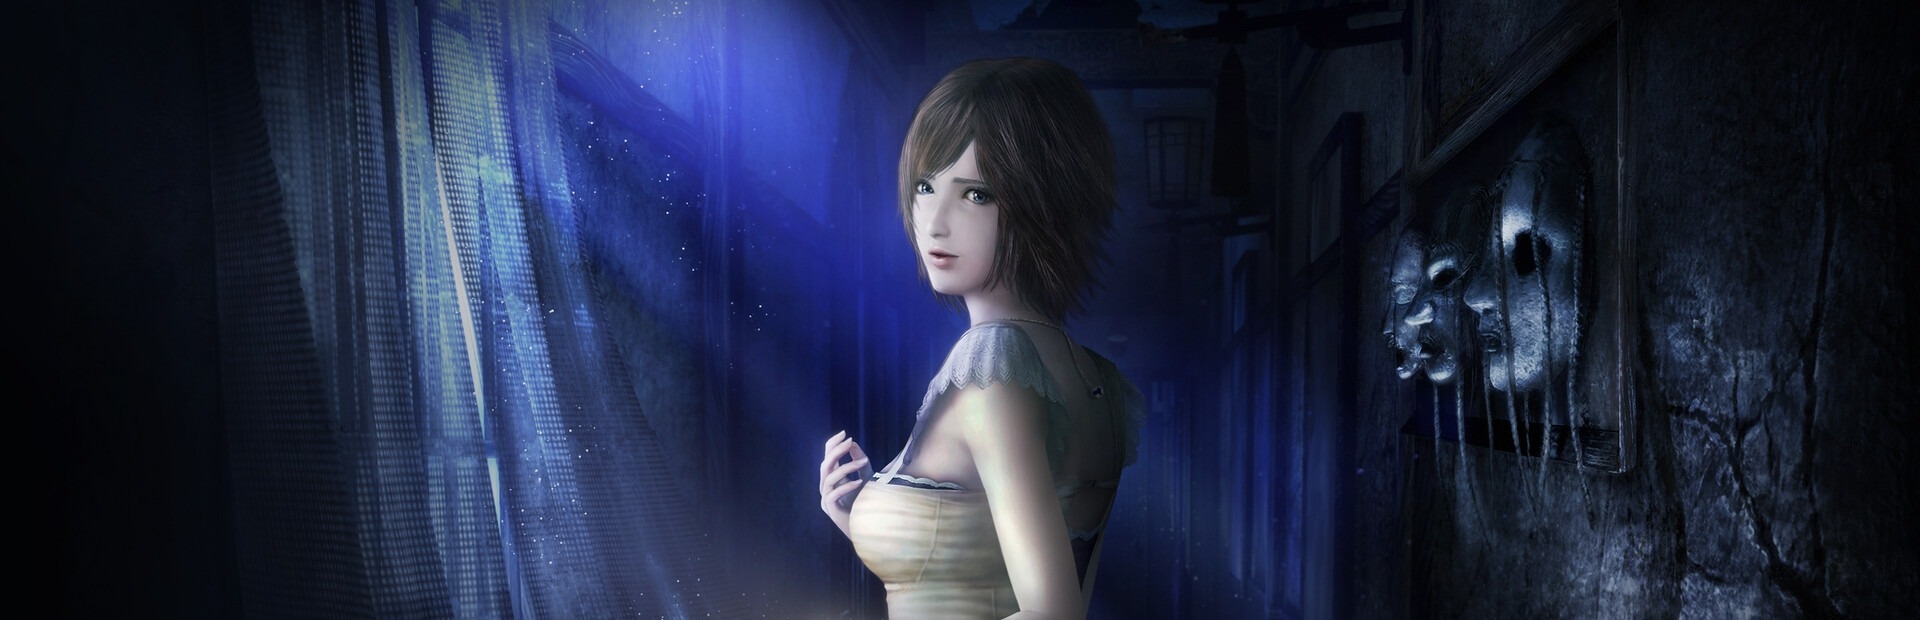 FATAL FRAME / PROJECT ZERO: Mask of the Lunar Eclipse